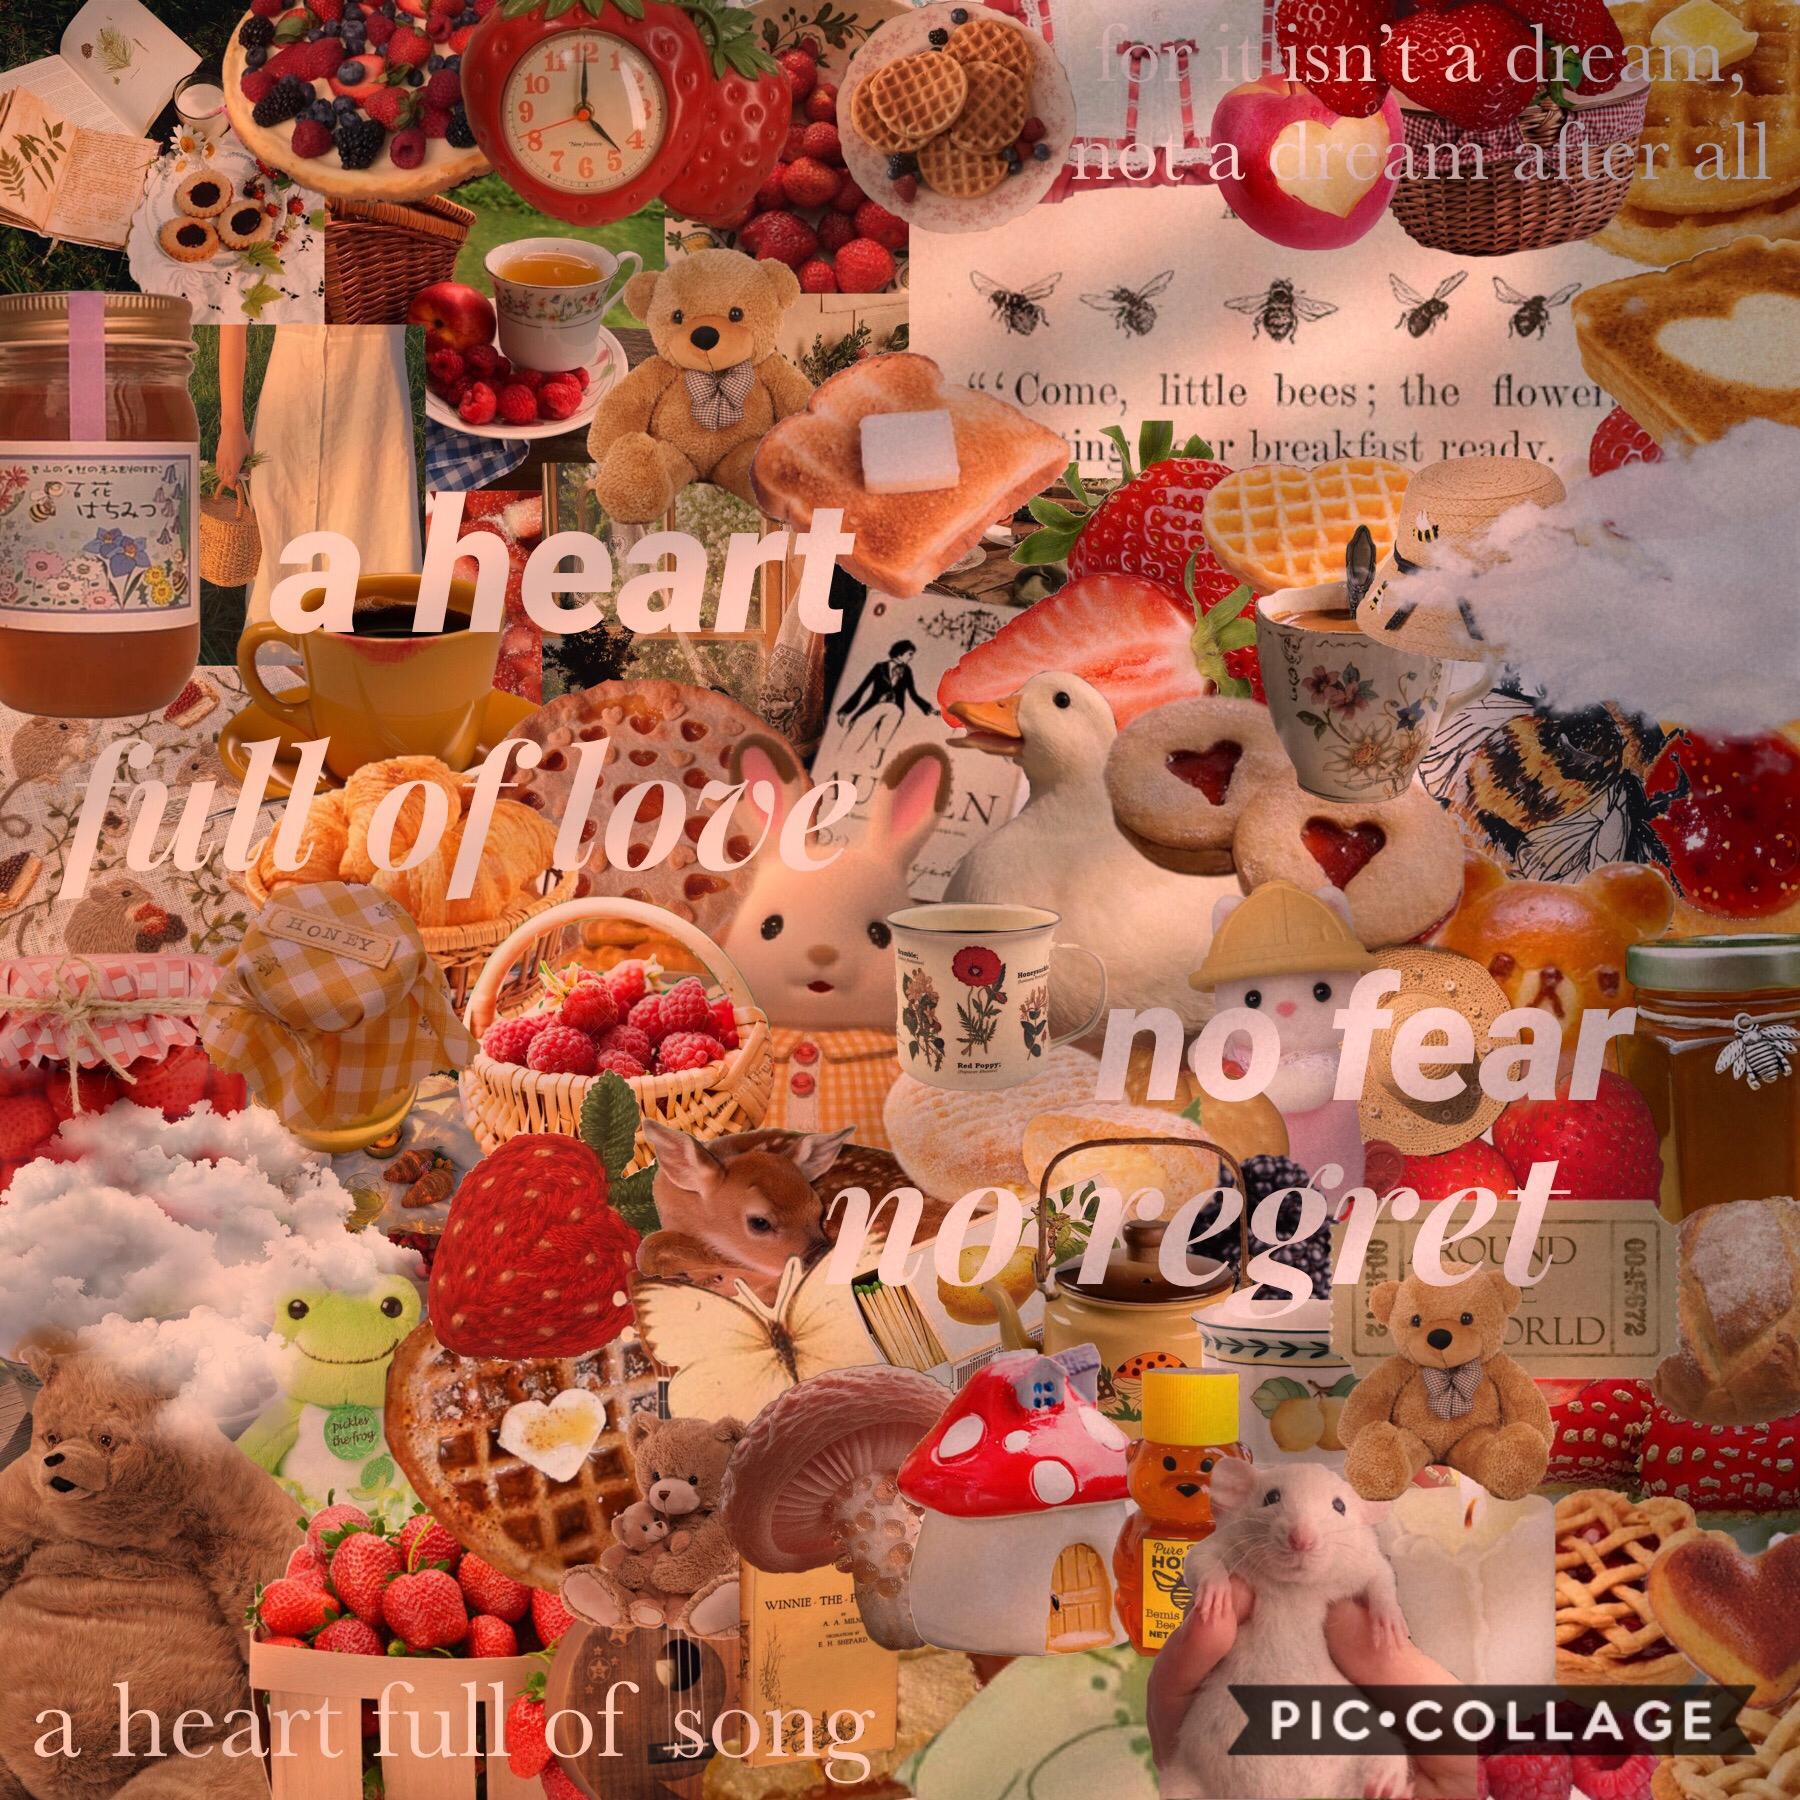 🍓 t a p 🍓 
🍯 ok so this song is “a heart full of love” from les mis and it’s so cute 
🍯 I kinda think this is really cute? Like all the colors and stuff 🥰
🍯 How are you guyssss? 